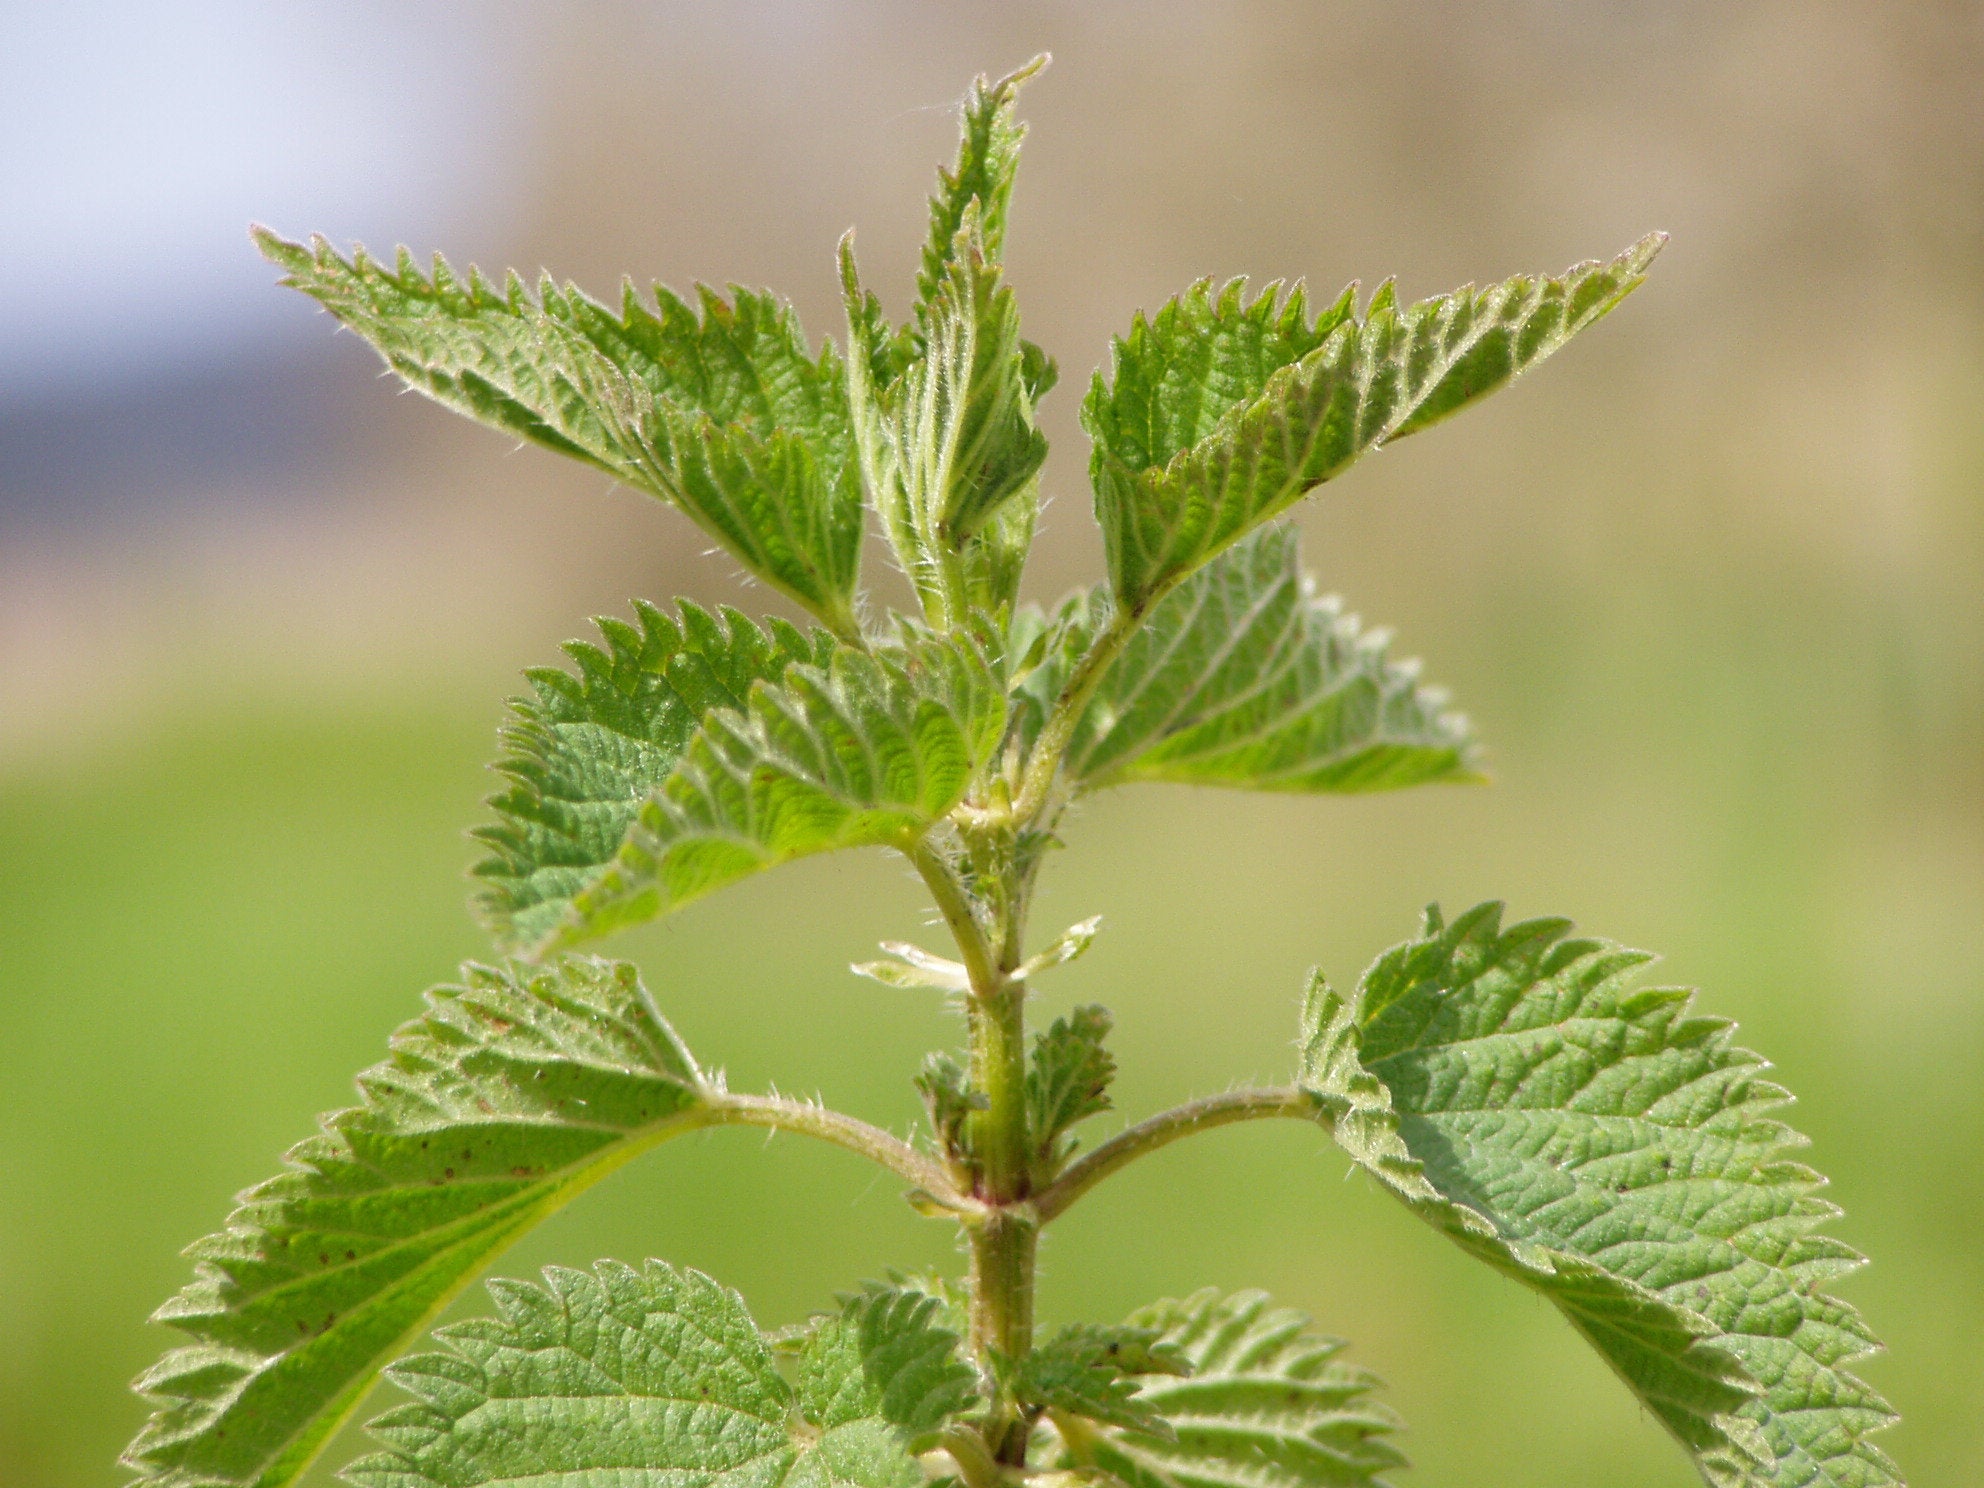 Stinging Nettle (Urtica Dioica) - 100 Seeds - Southern Seed Exchange